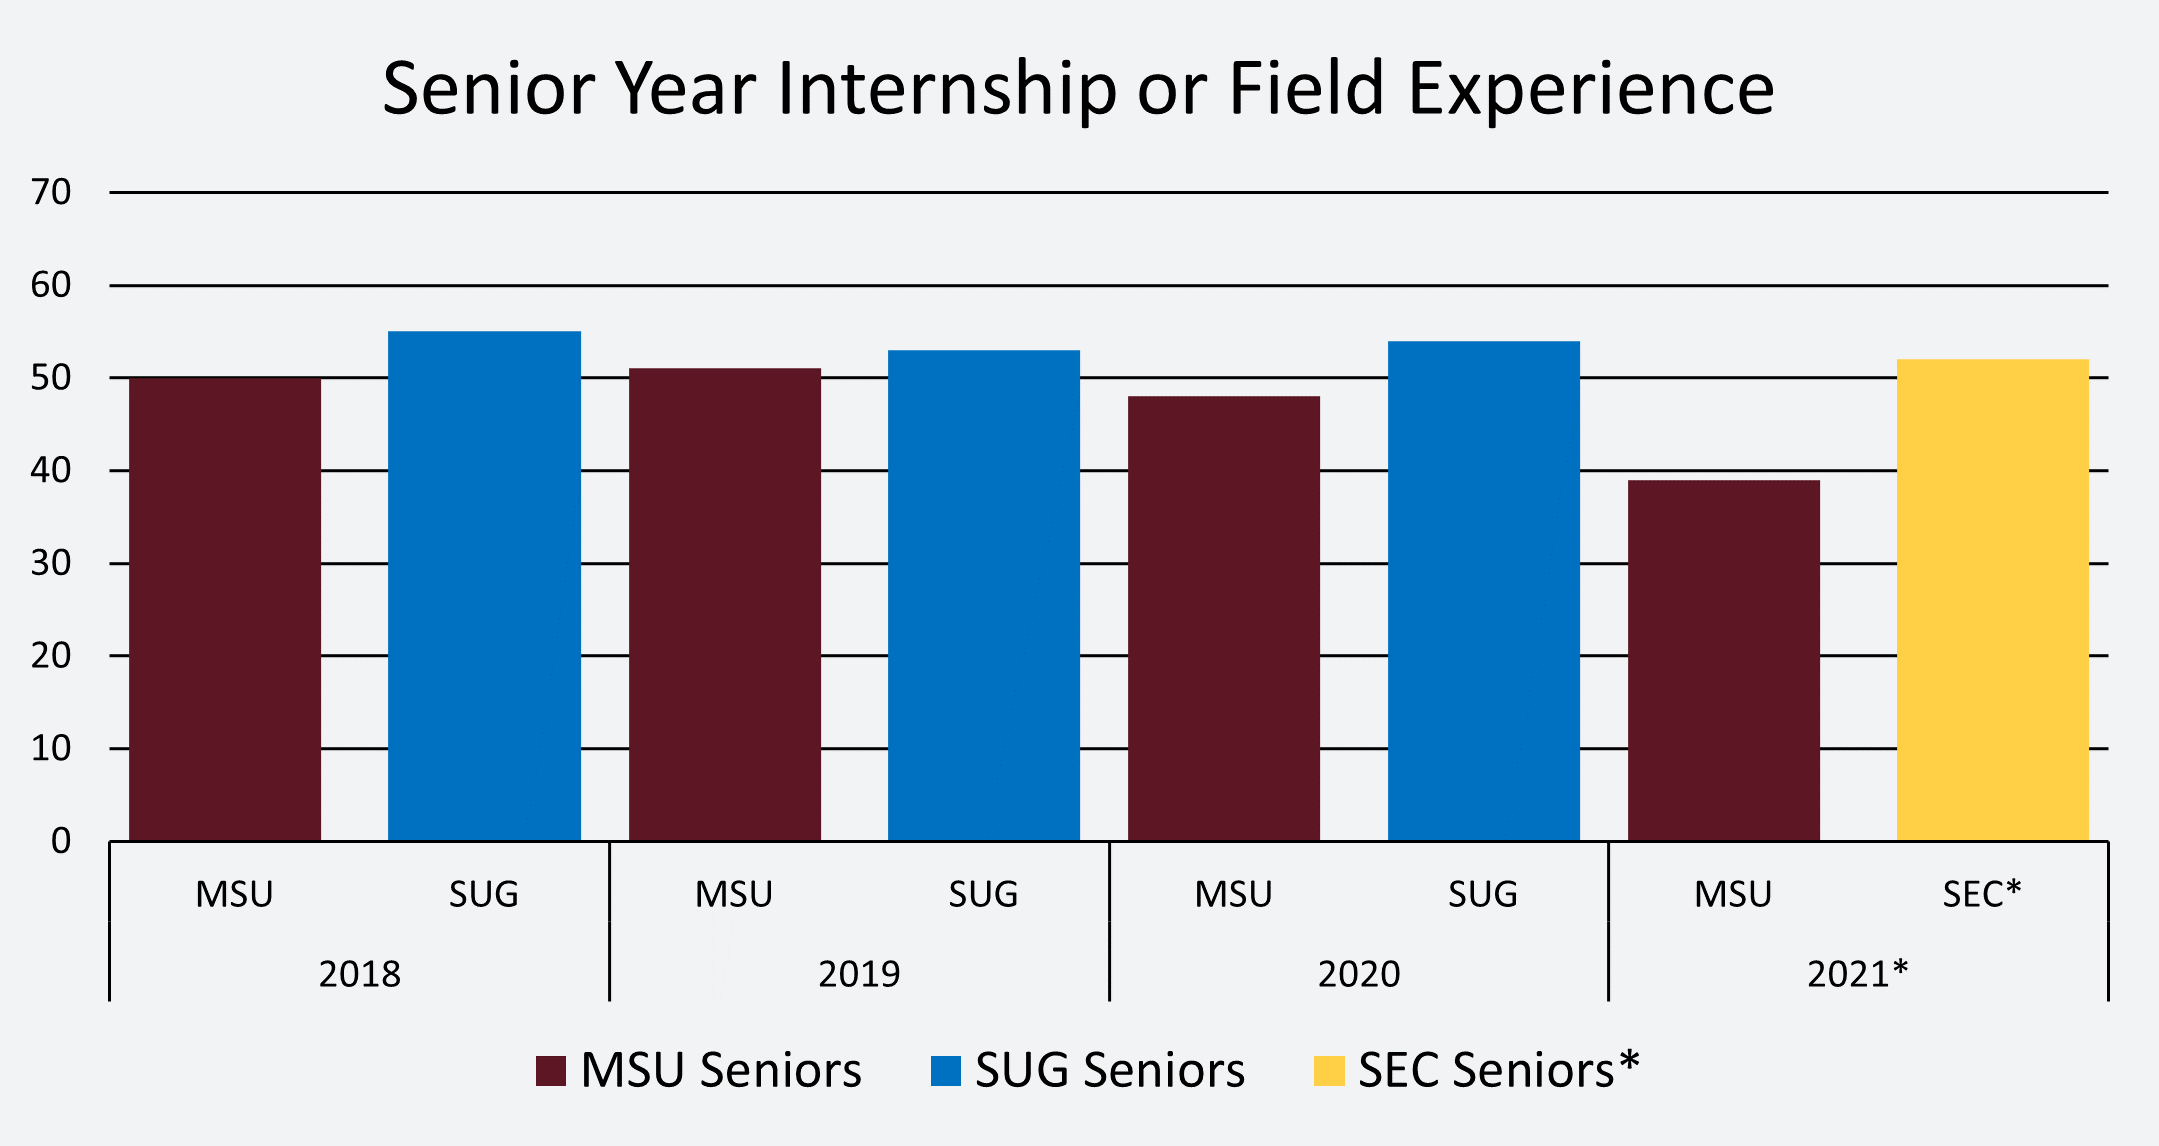 Chart showing NSSE Senior Year Internship and Field Experience results between MSU and SUG.